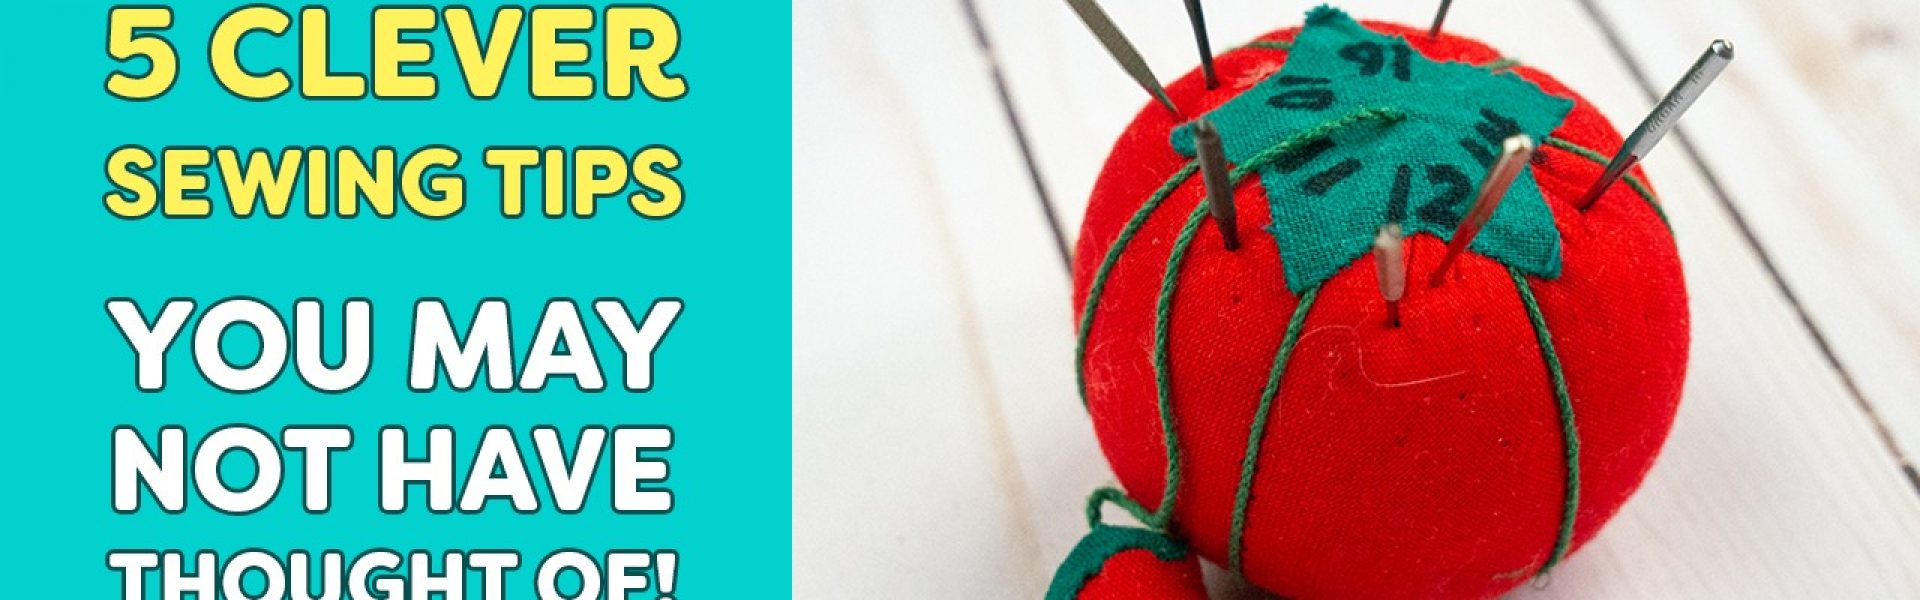 5 clever sewing tips you may not have thought of.